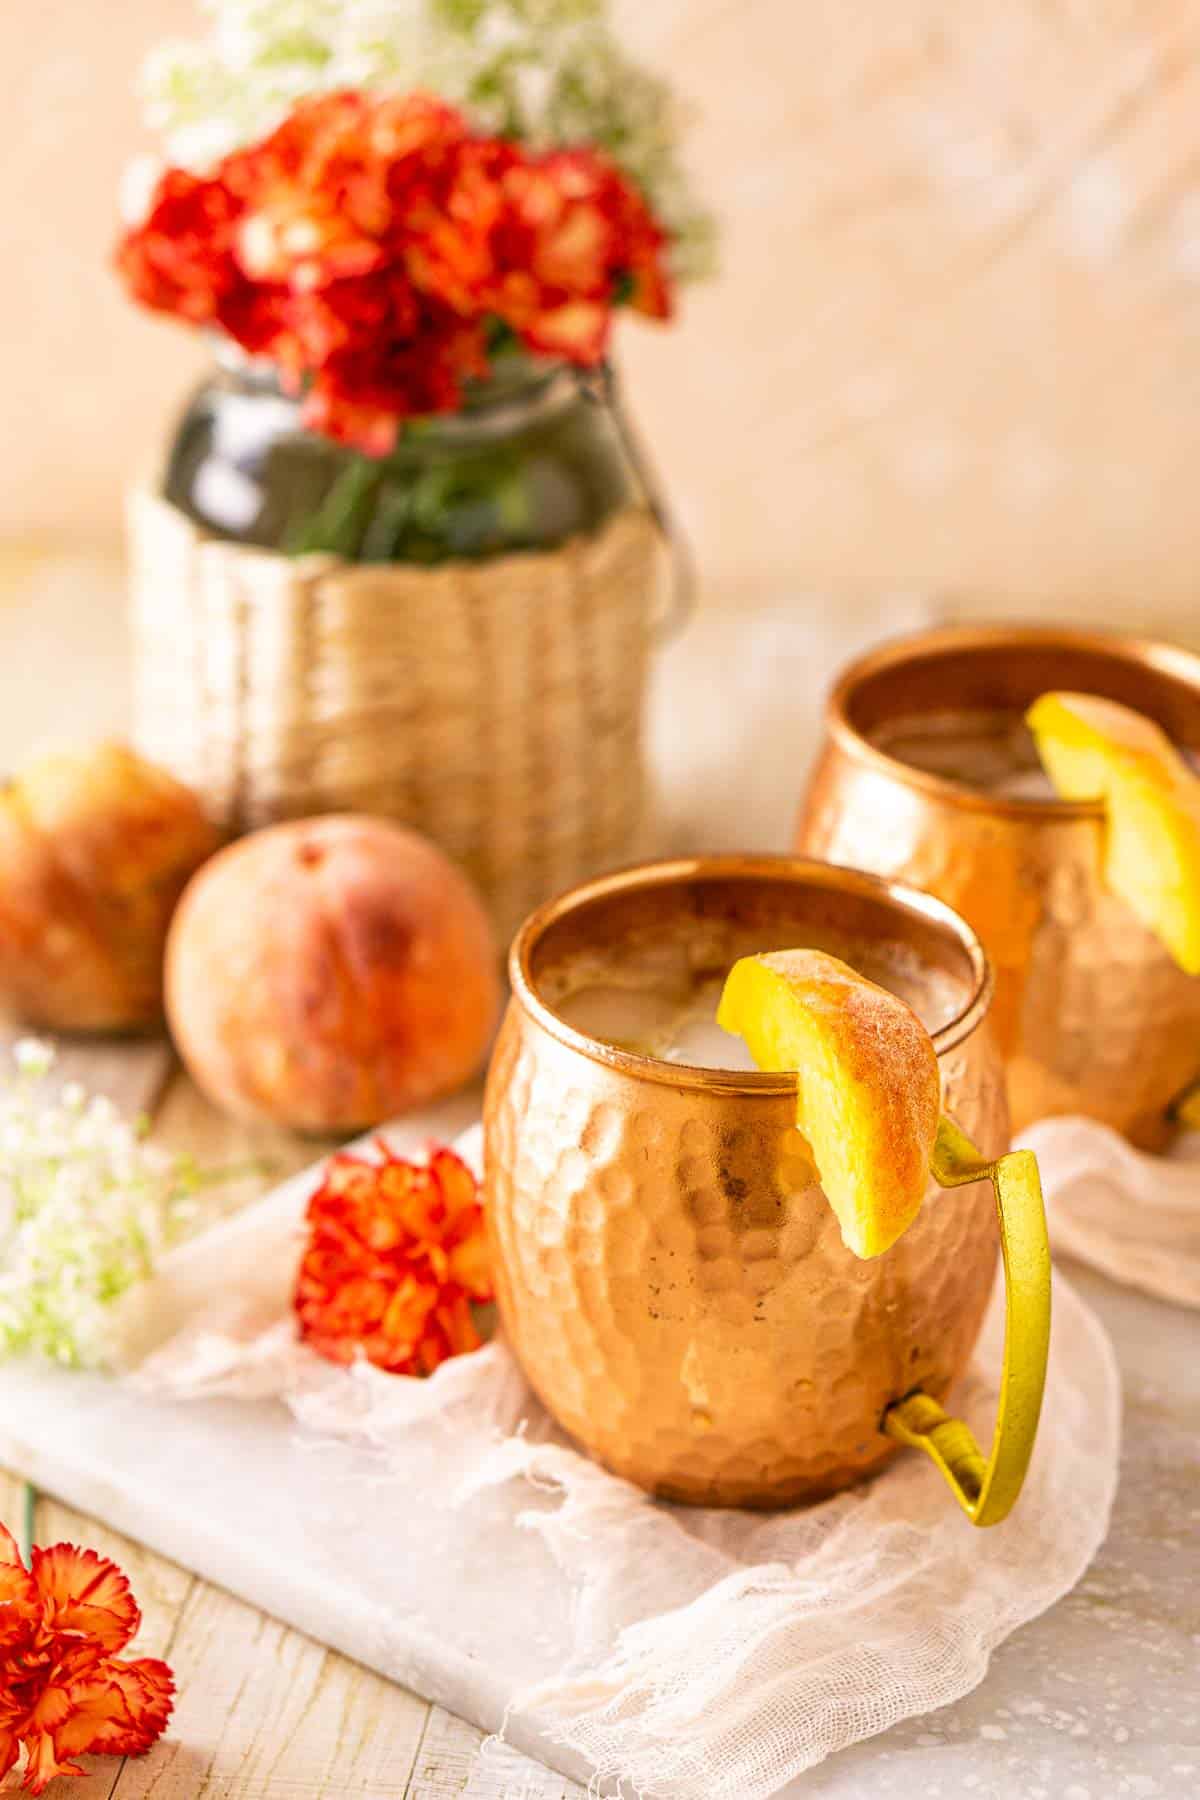 A side view of two peach Moscow mule cocktails in copper mugs with flowers behind them.